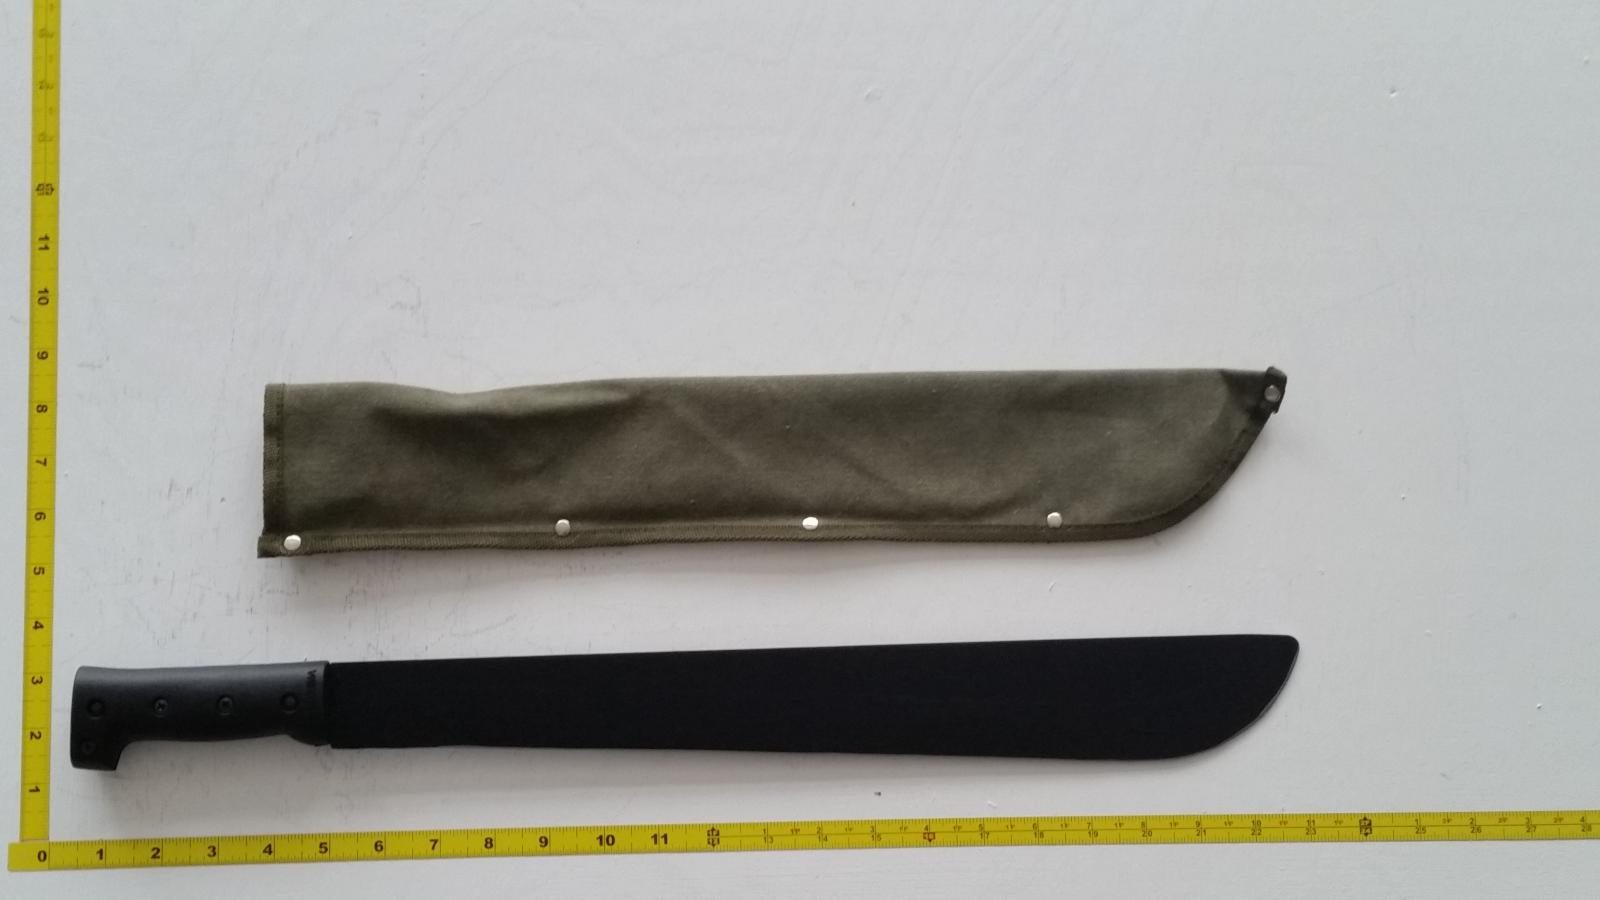 Modern Steel Machette with Sheath. We have 3. NOT approved for blade-to-blade stage combat.